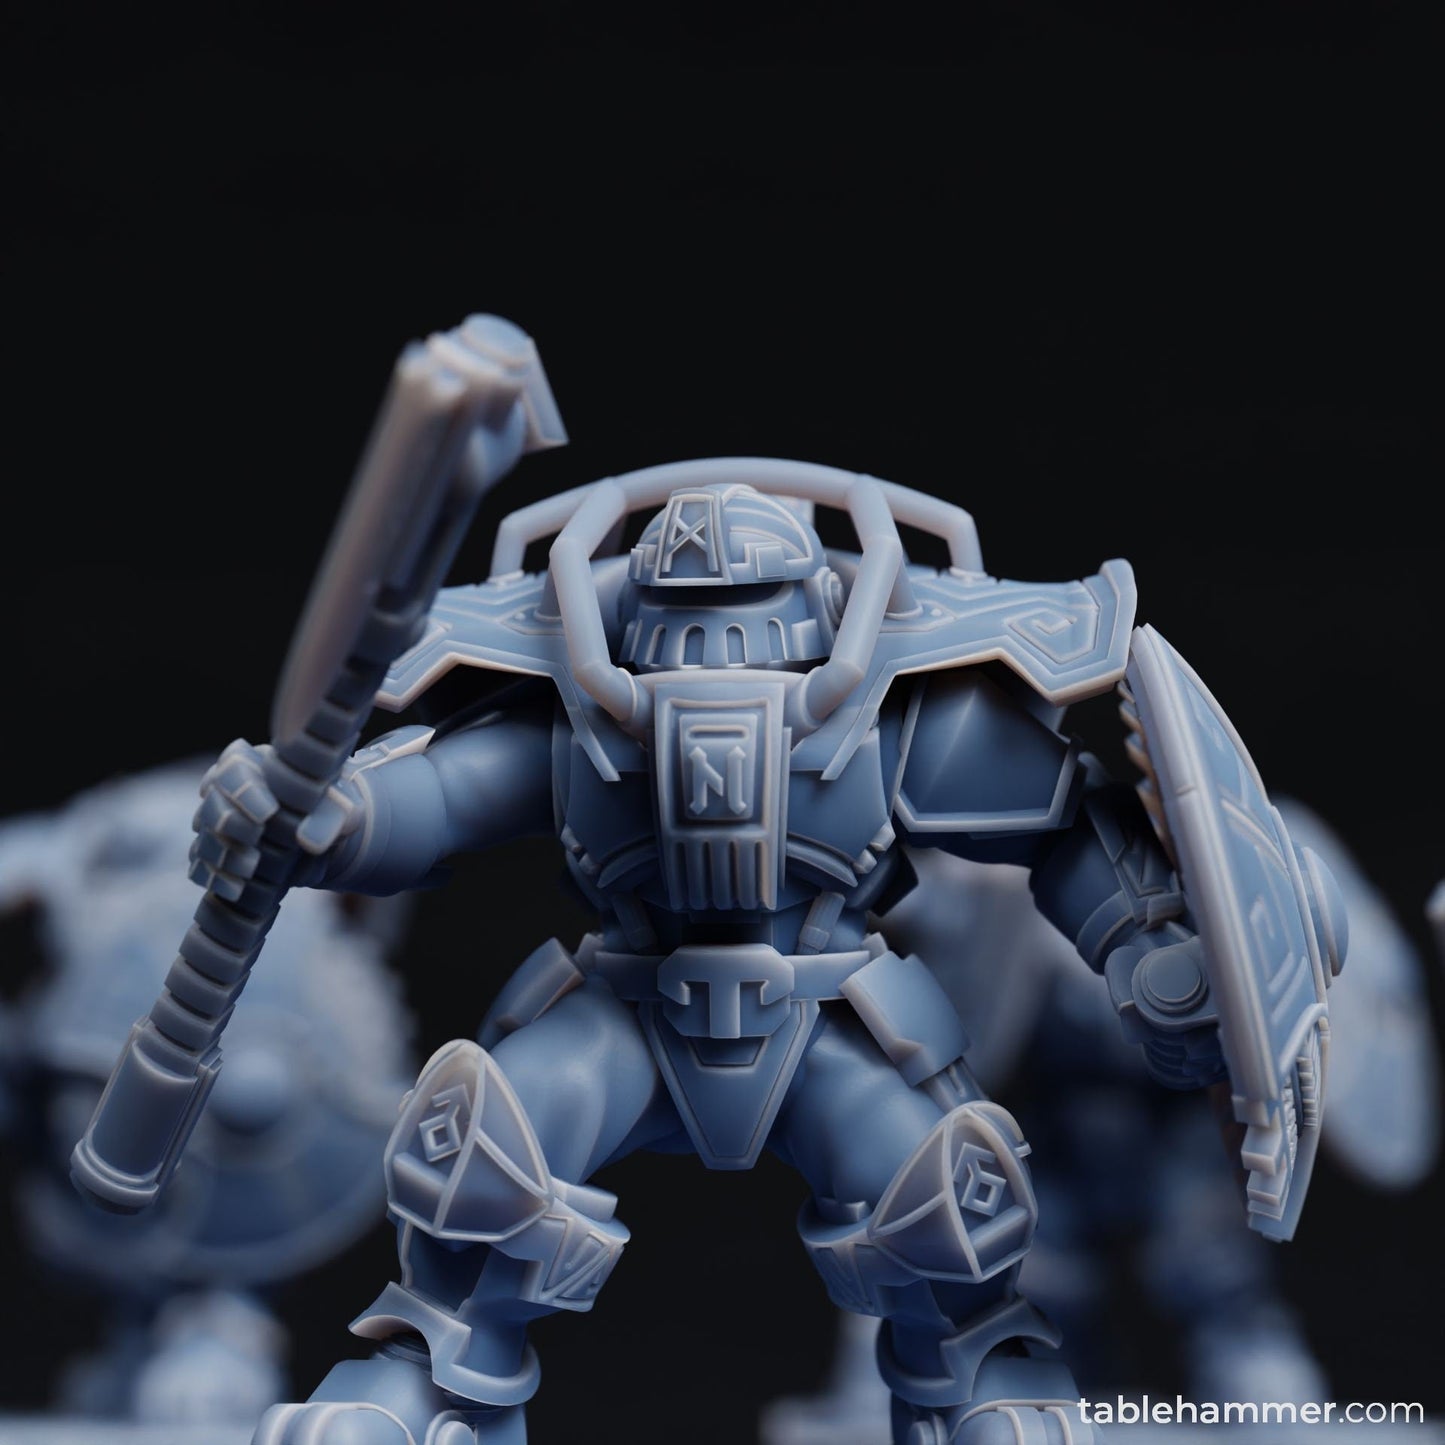 Minotaurs (Axesquad) – Federation of Tyr - Trisagion Models